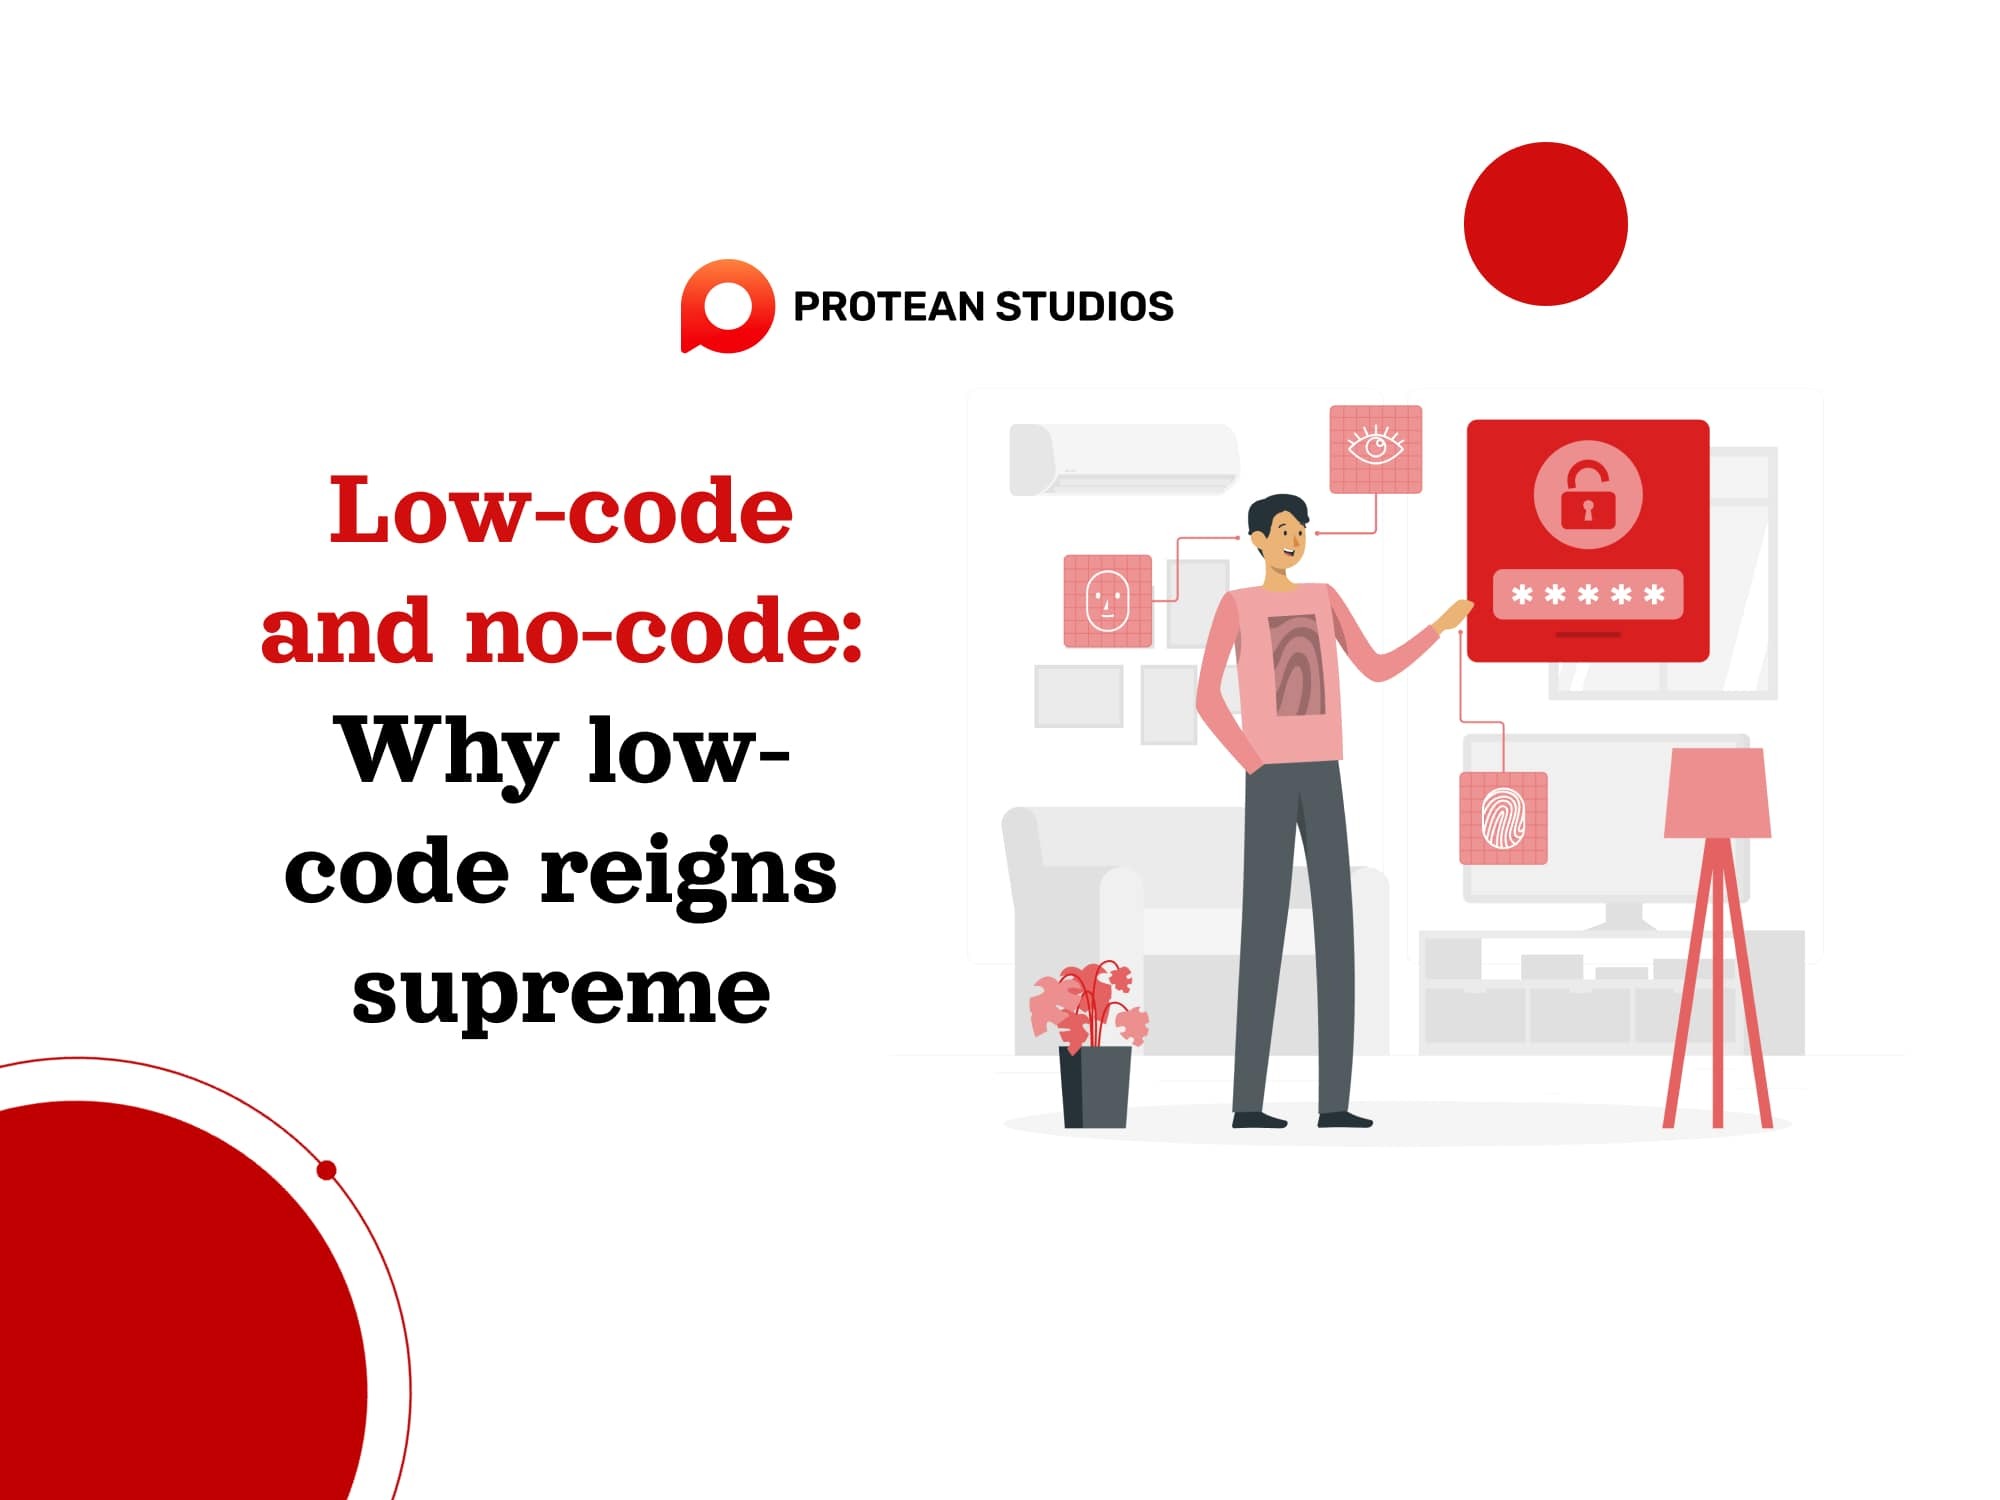 Low-code and no-code: Why low-code reigns supreme